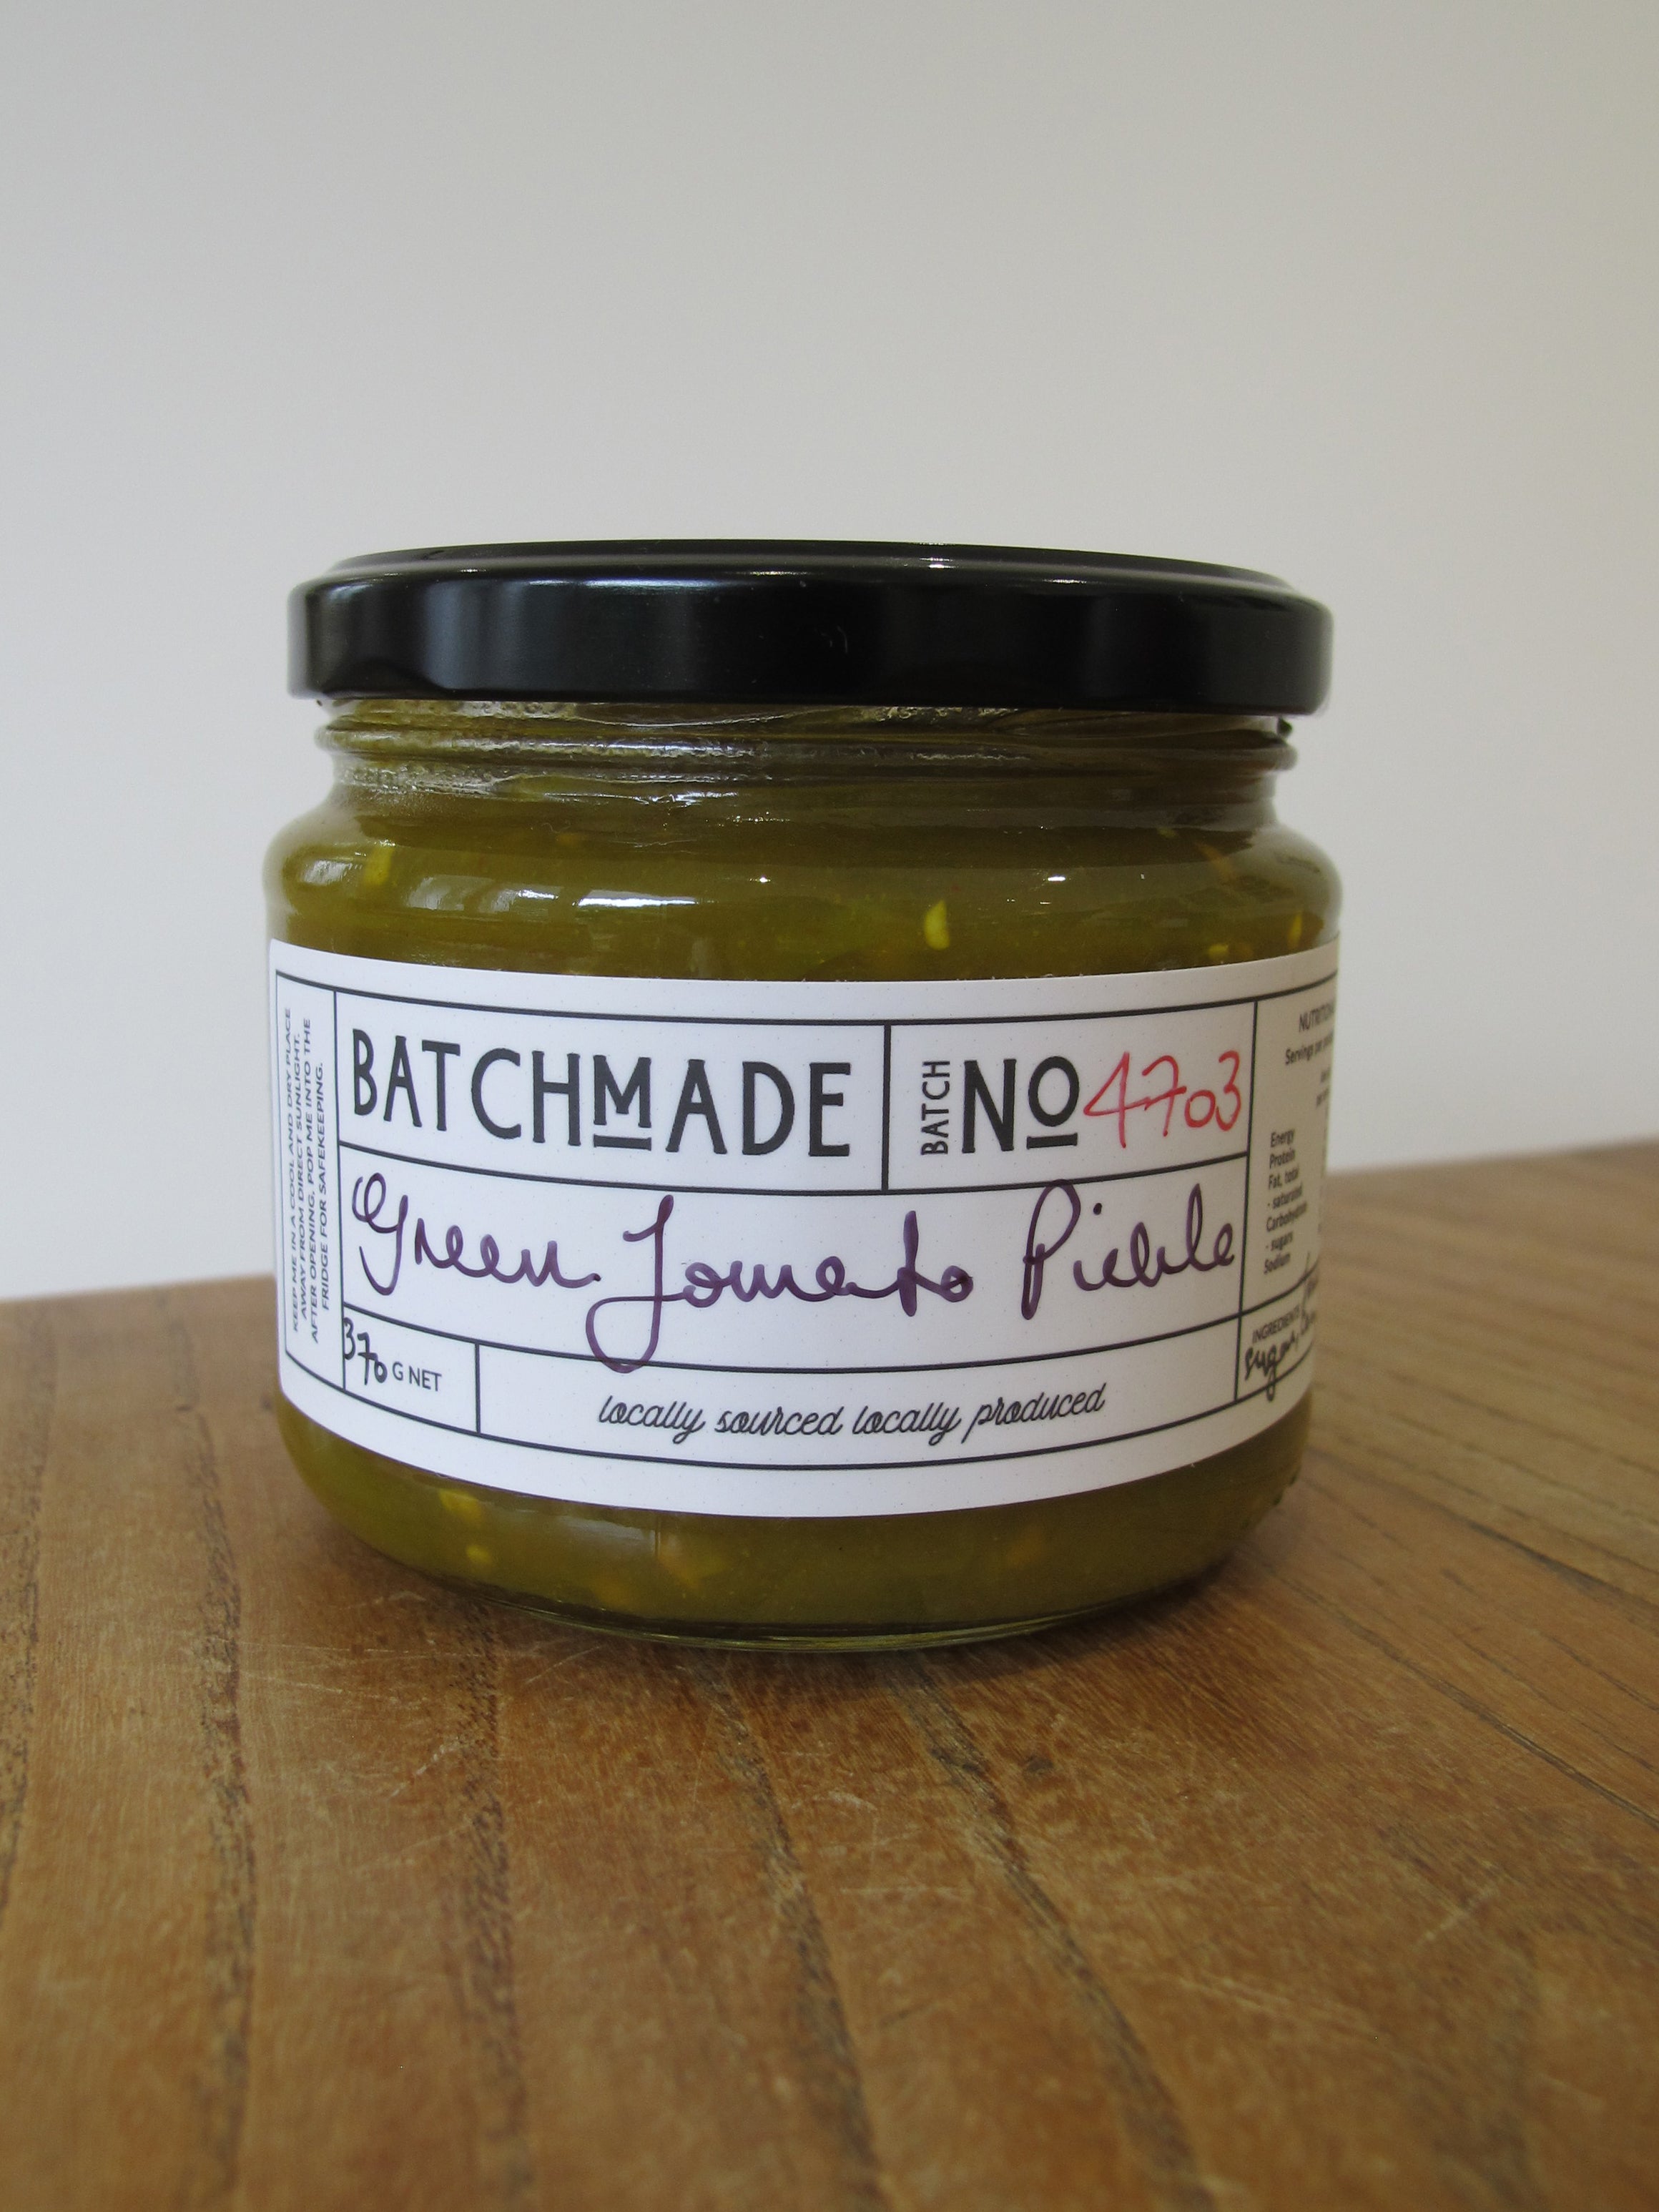 BatchMade green tomato pickle